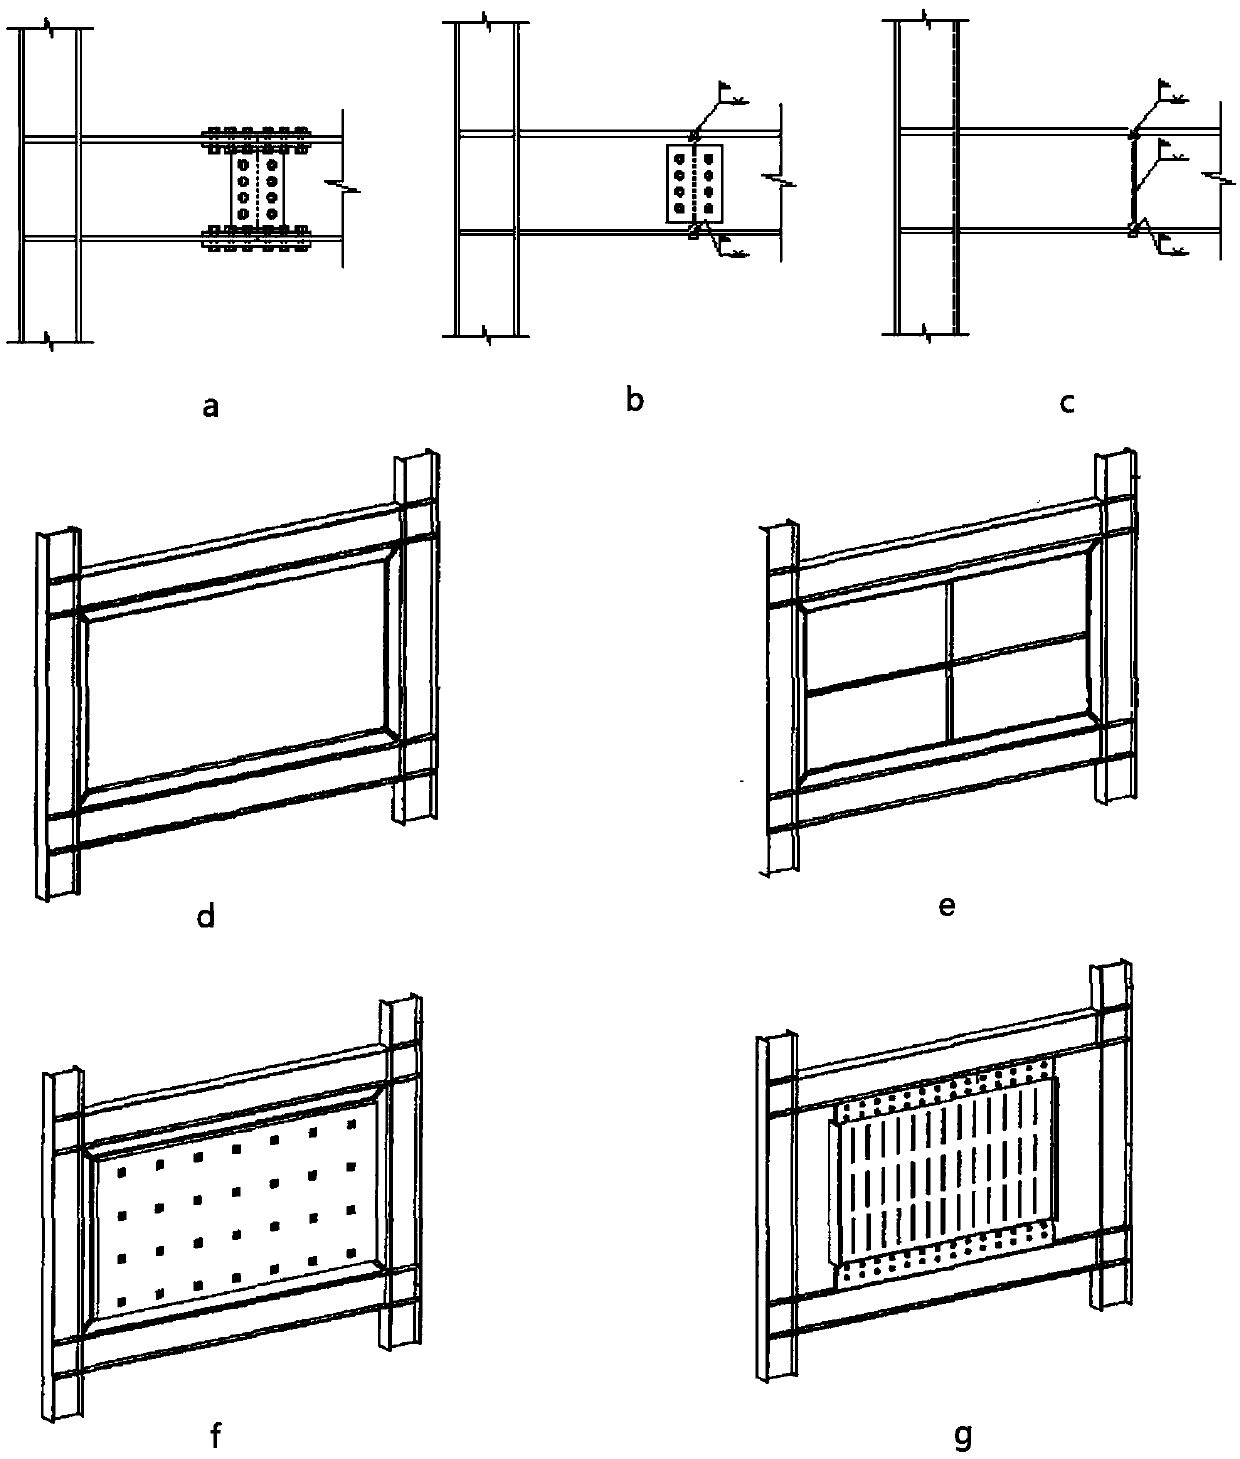 Steel frame shear wall structure